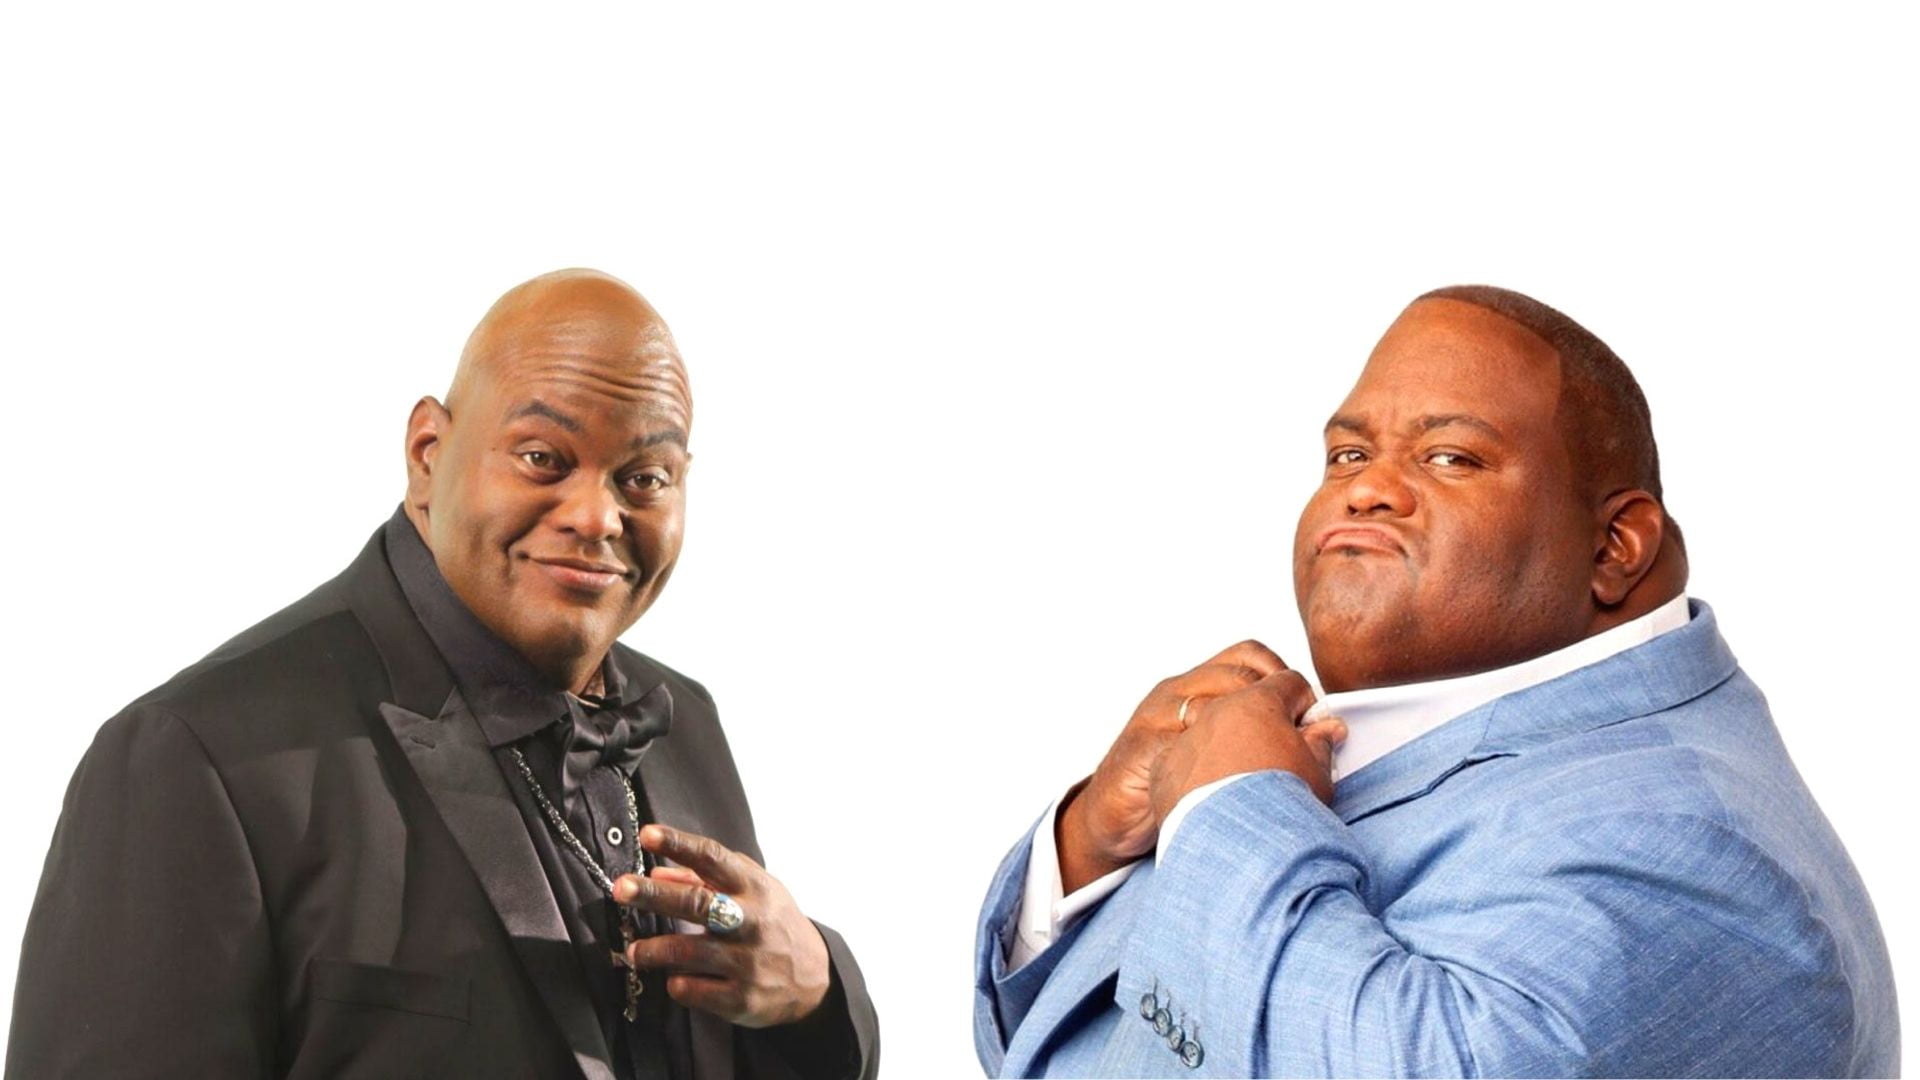 Lavell Crawford's Weight Loss Experience